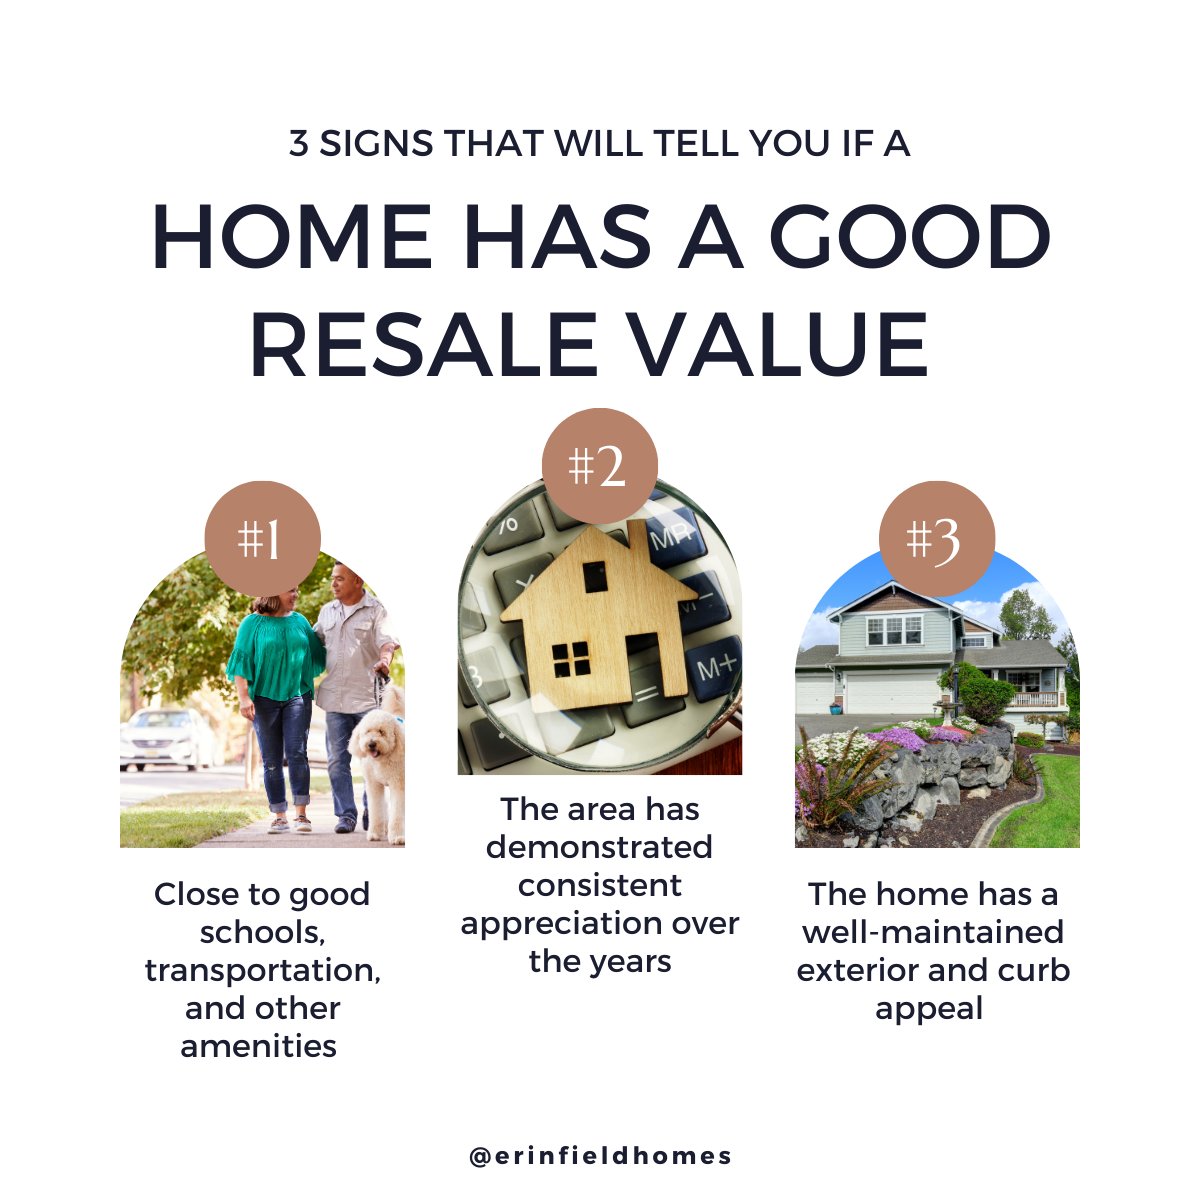 Focus on timeless features that remain desirable year after year. Investing in such qualities today can lead to a rewarding financial future. 

#lastingvalue #timelessdesign #smartinvestment #homebuyingtips #realestatewisdom #resalevalue #homeselling #homevalue